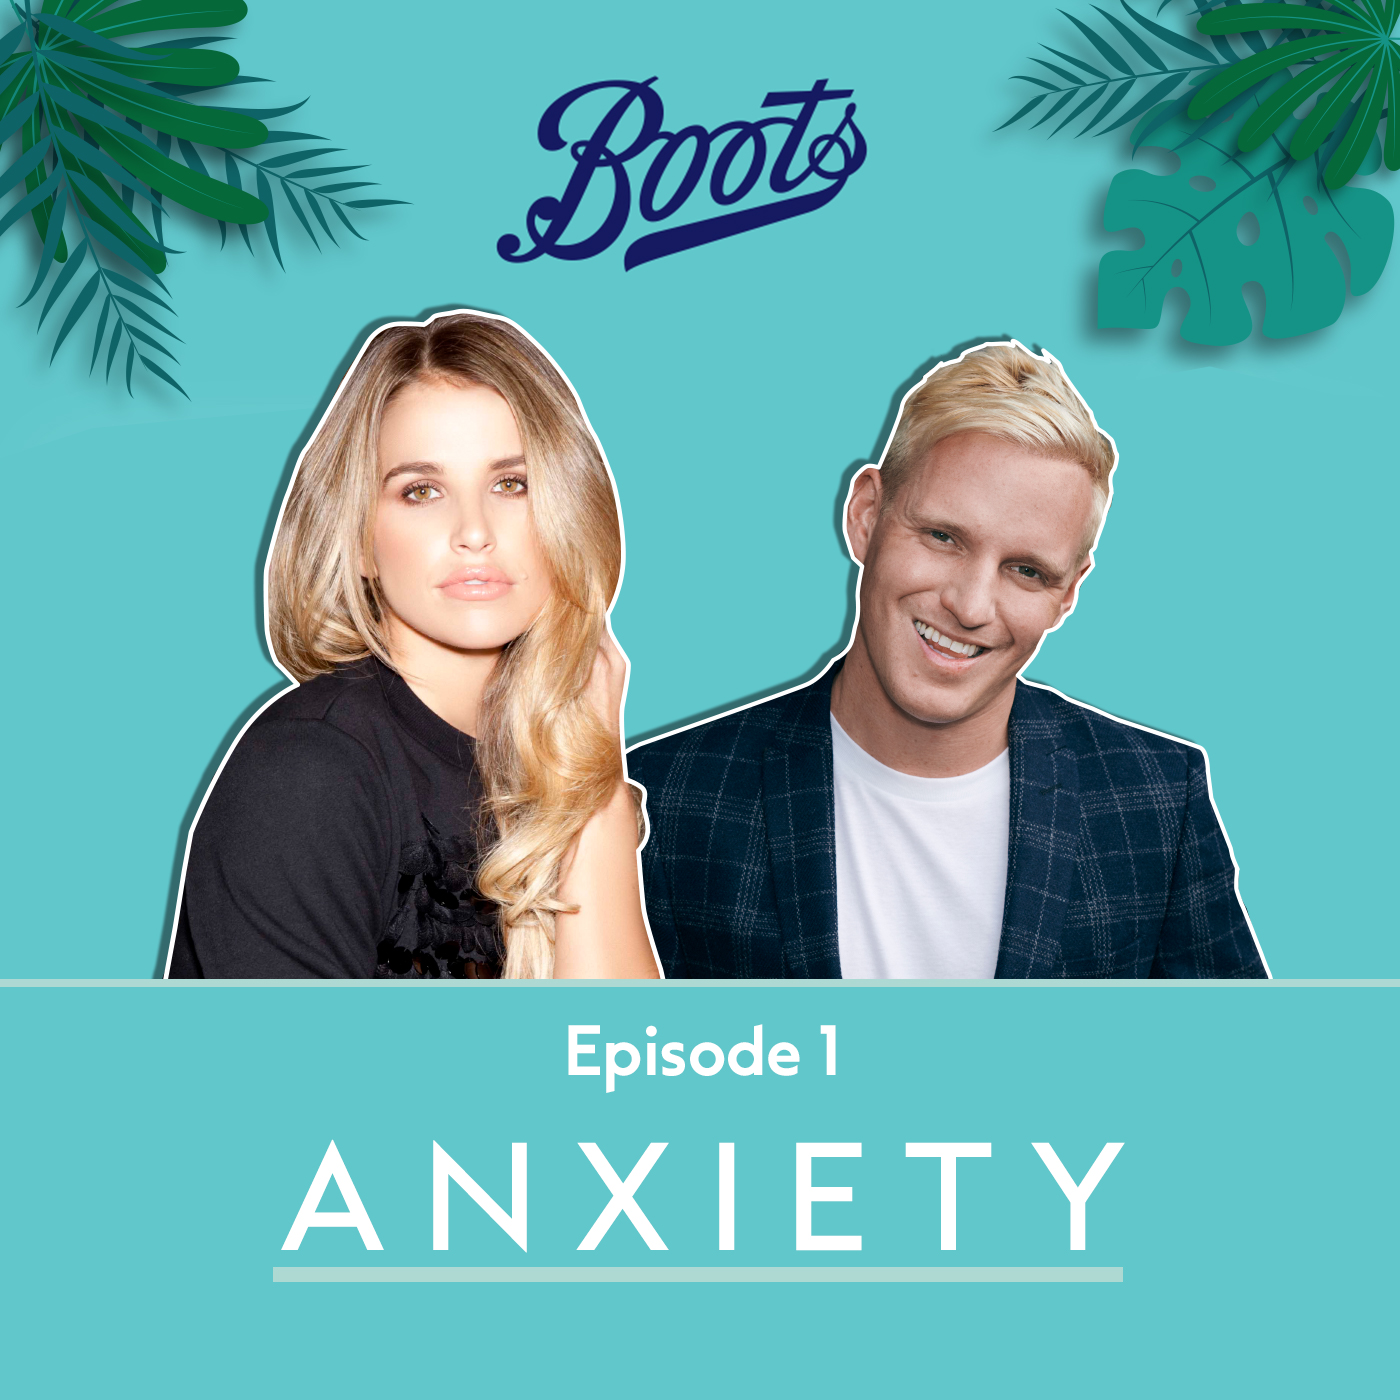 Worry Lines What It’s Like To Have Anxiety With Jamie Laing Boots